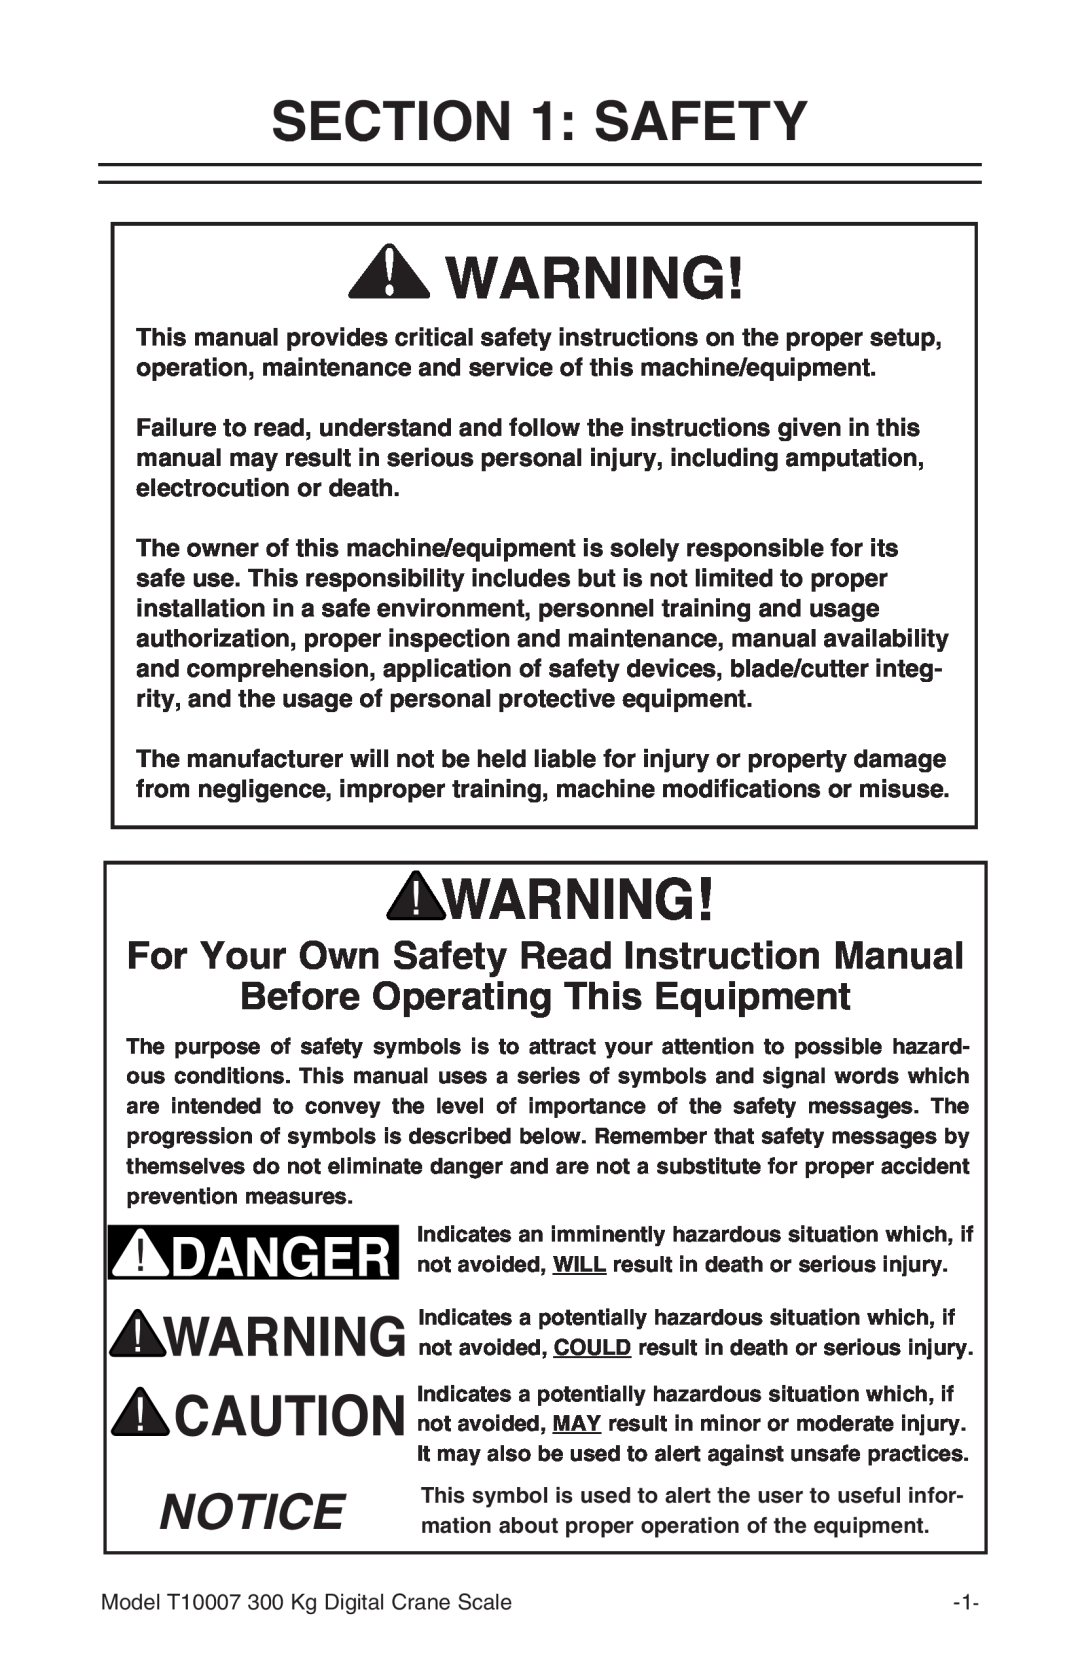 Grizzly T10007 owner manual For Your Own Safety Read Instruction Manual, Before Operating This Equipment 